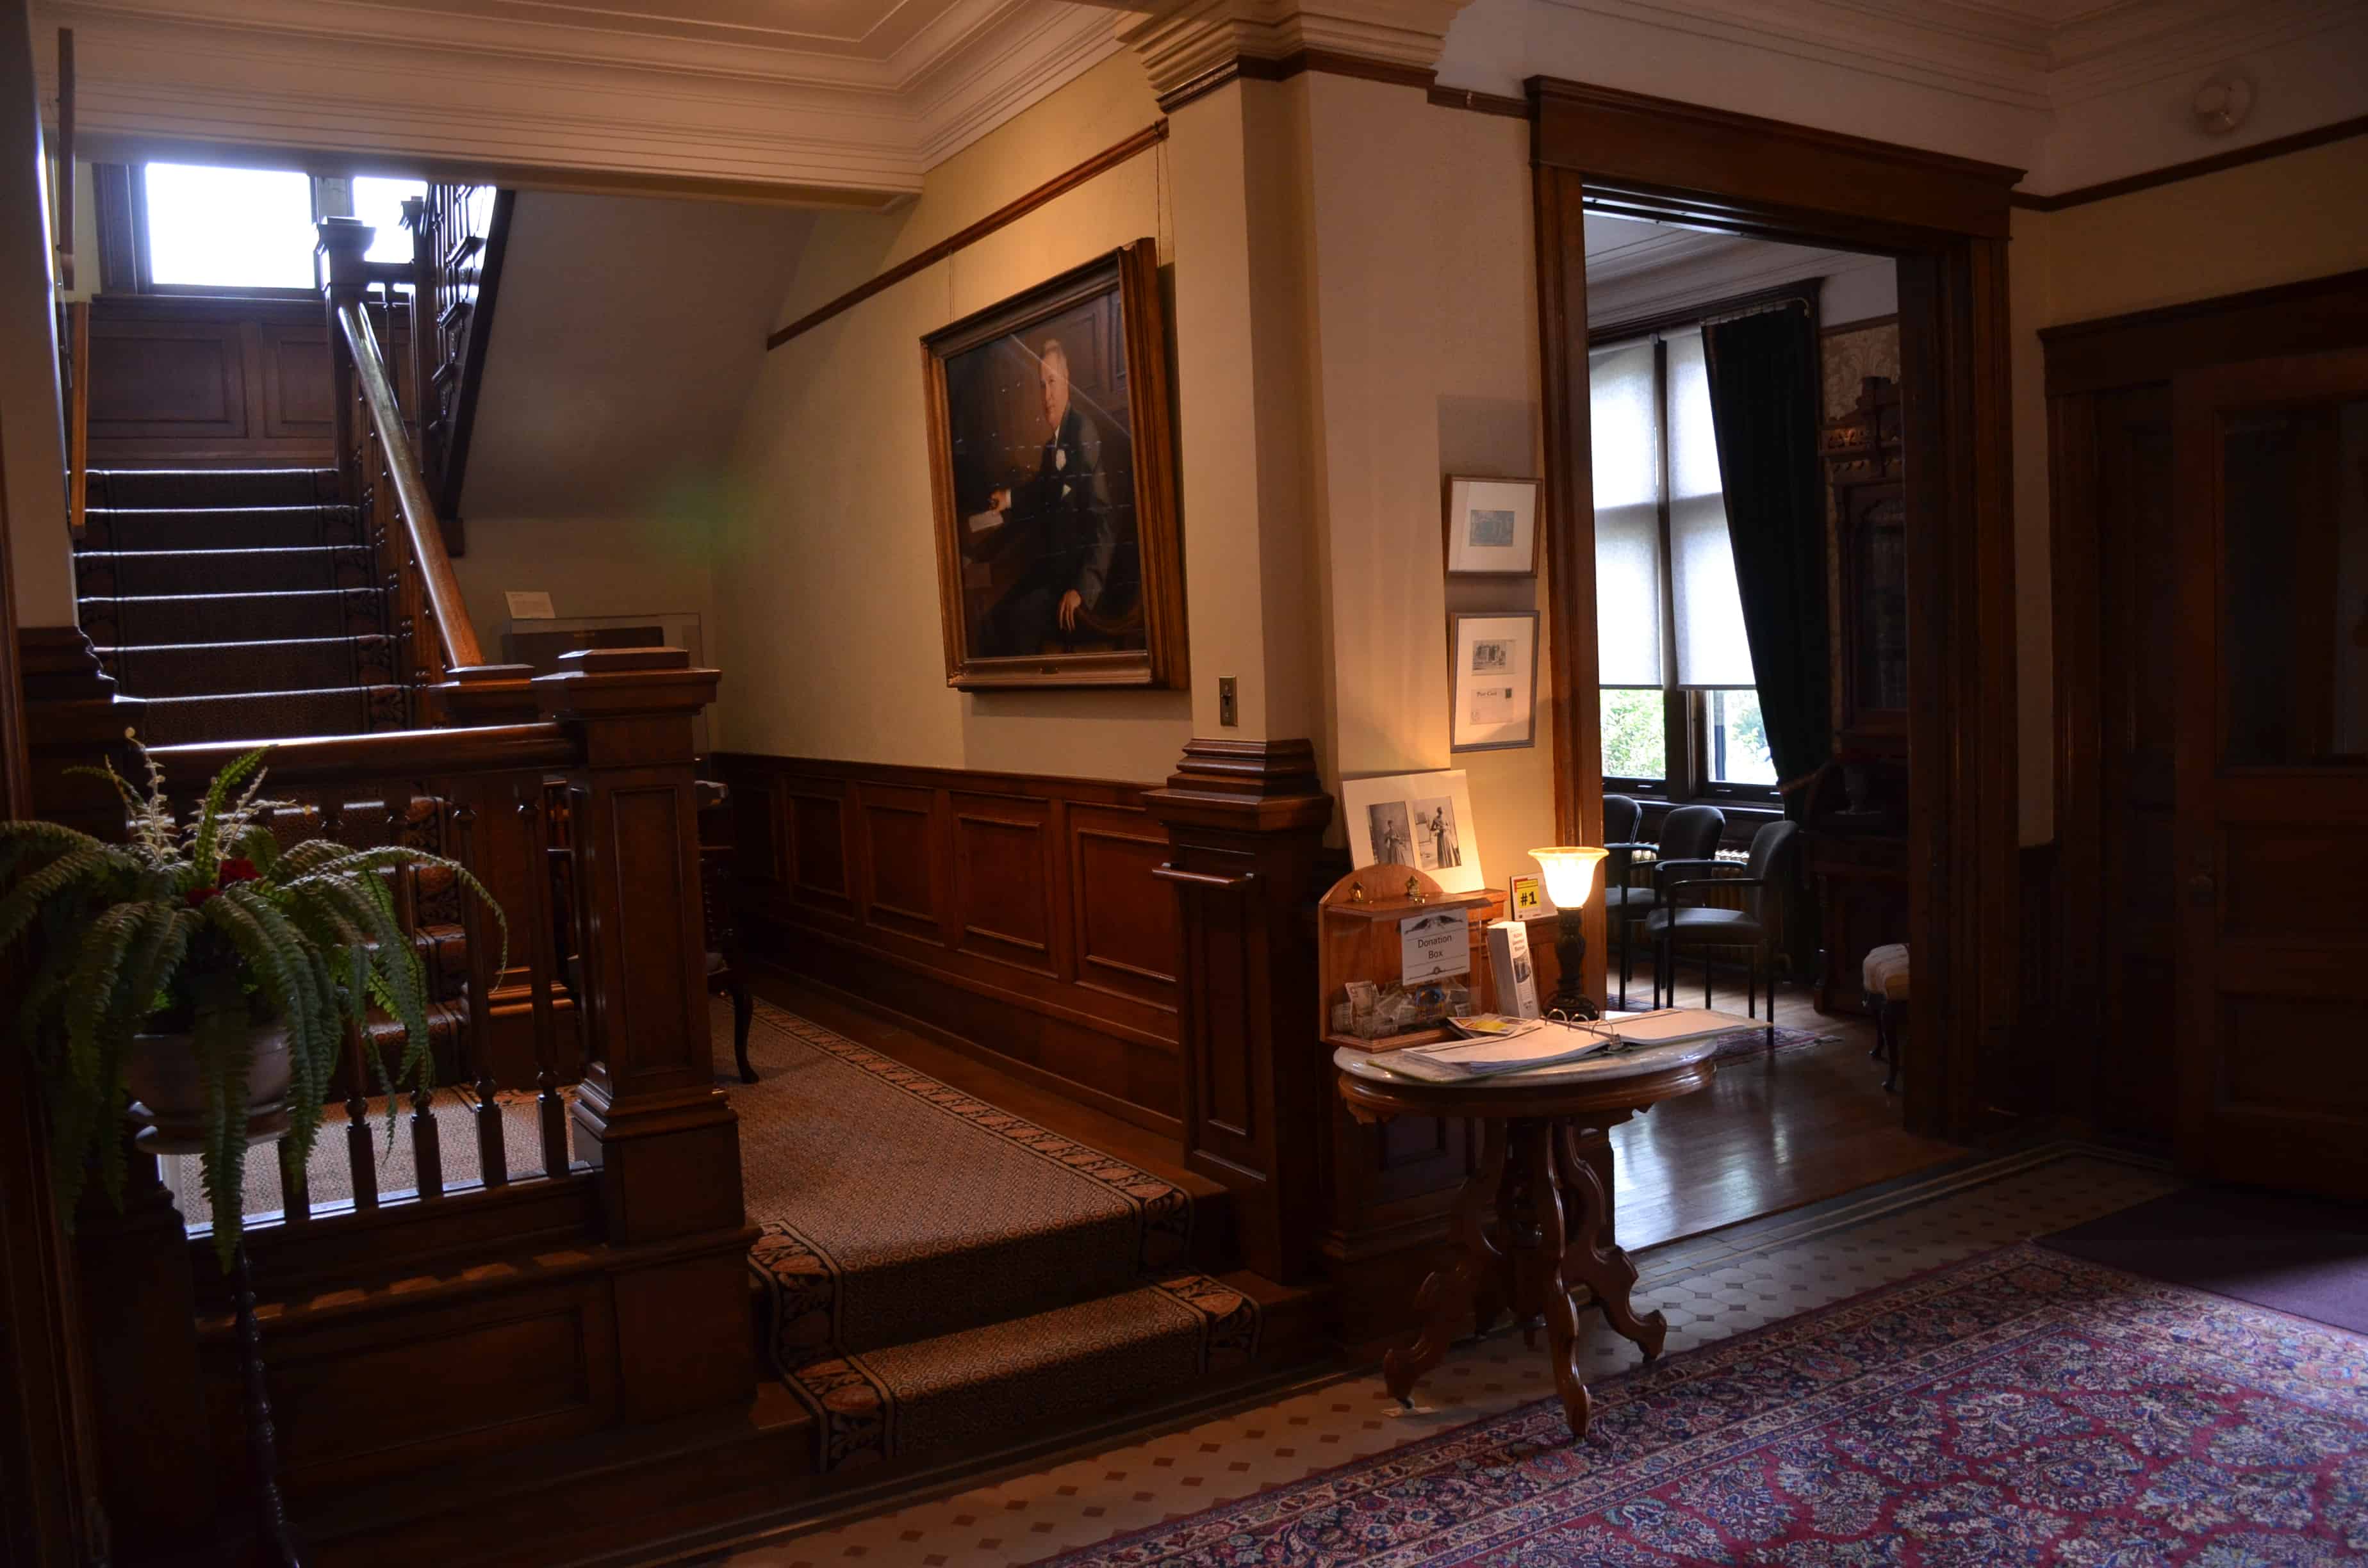 Foyer in the Wyoming Governor's Mansion in Cheyenne